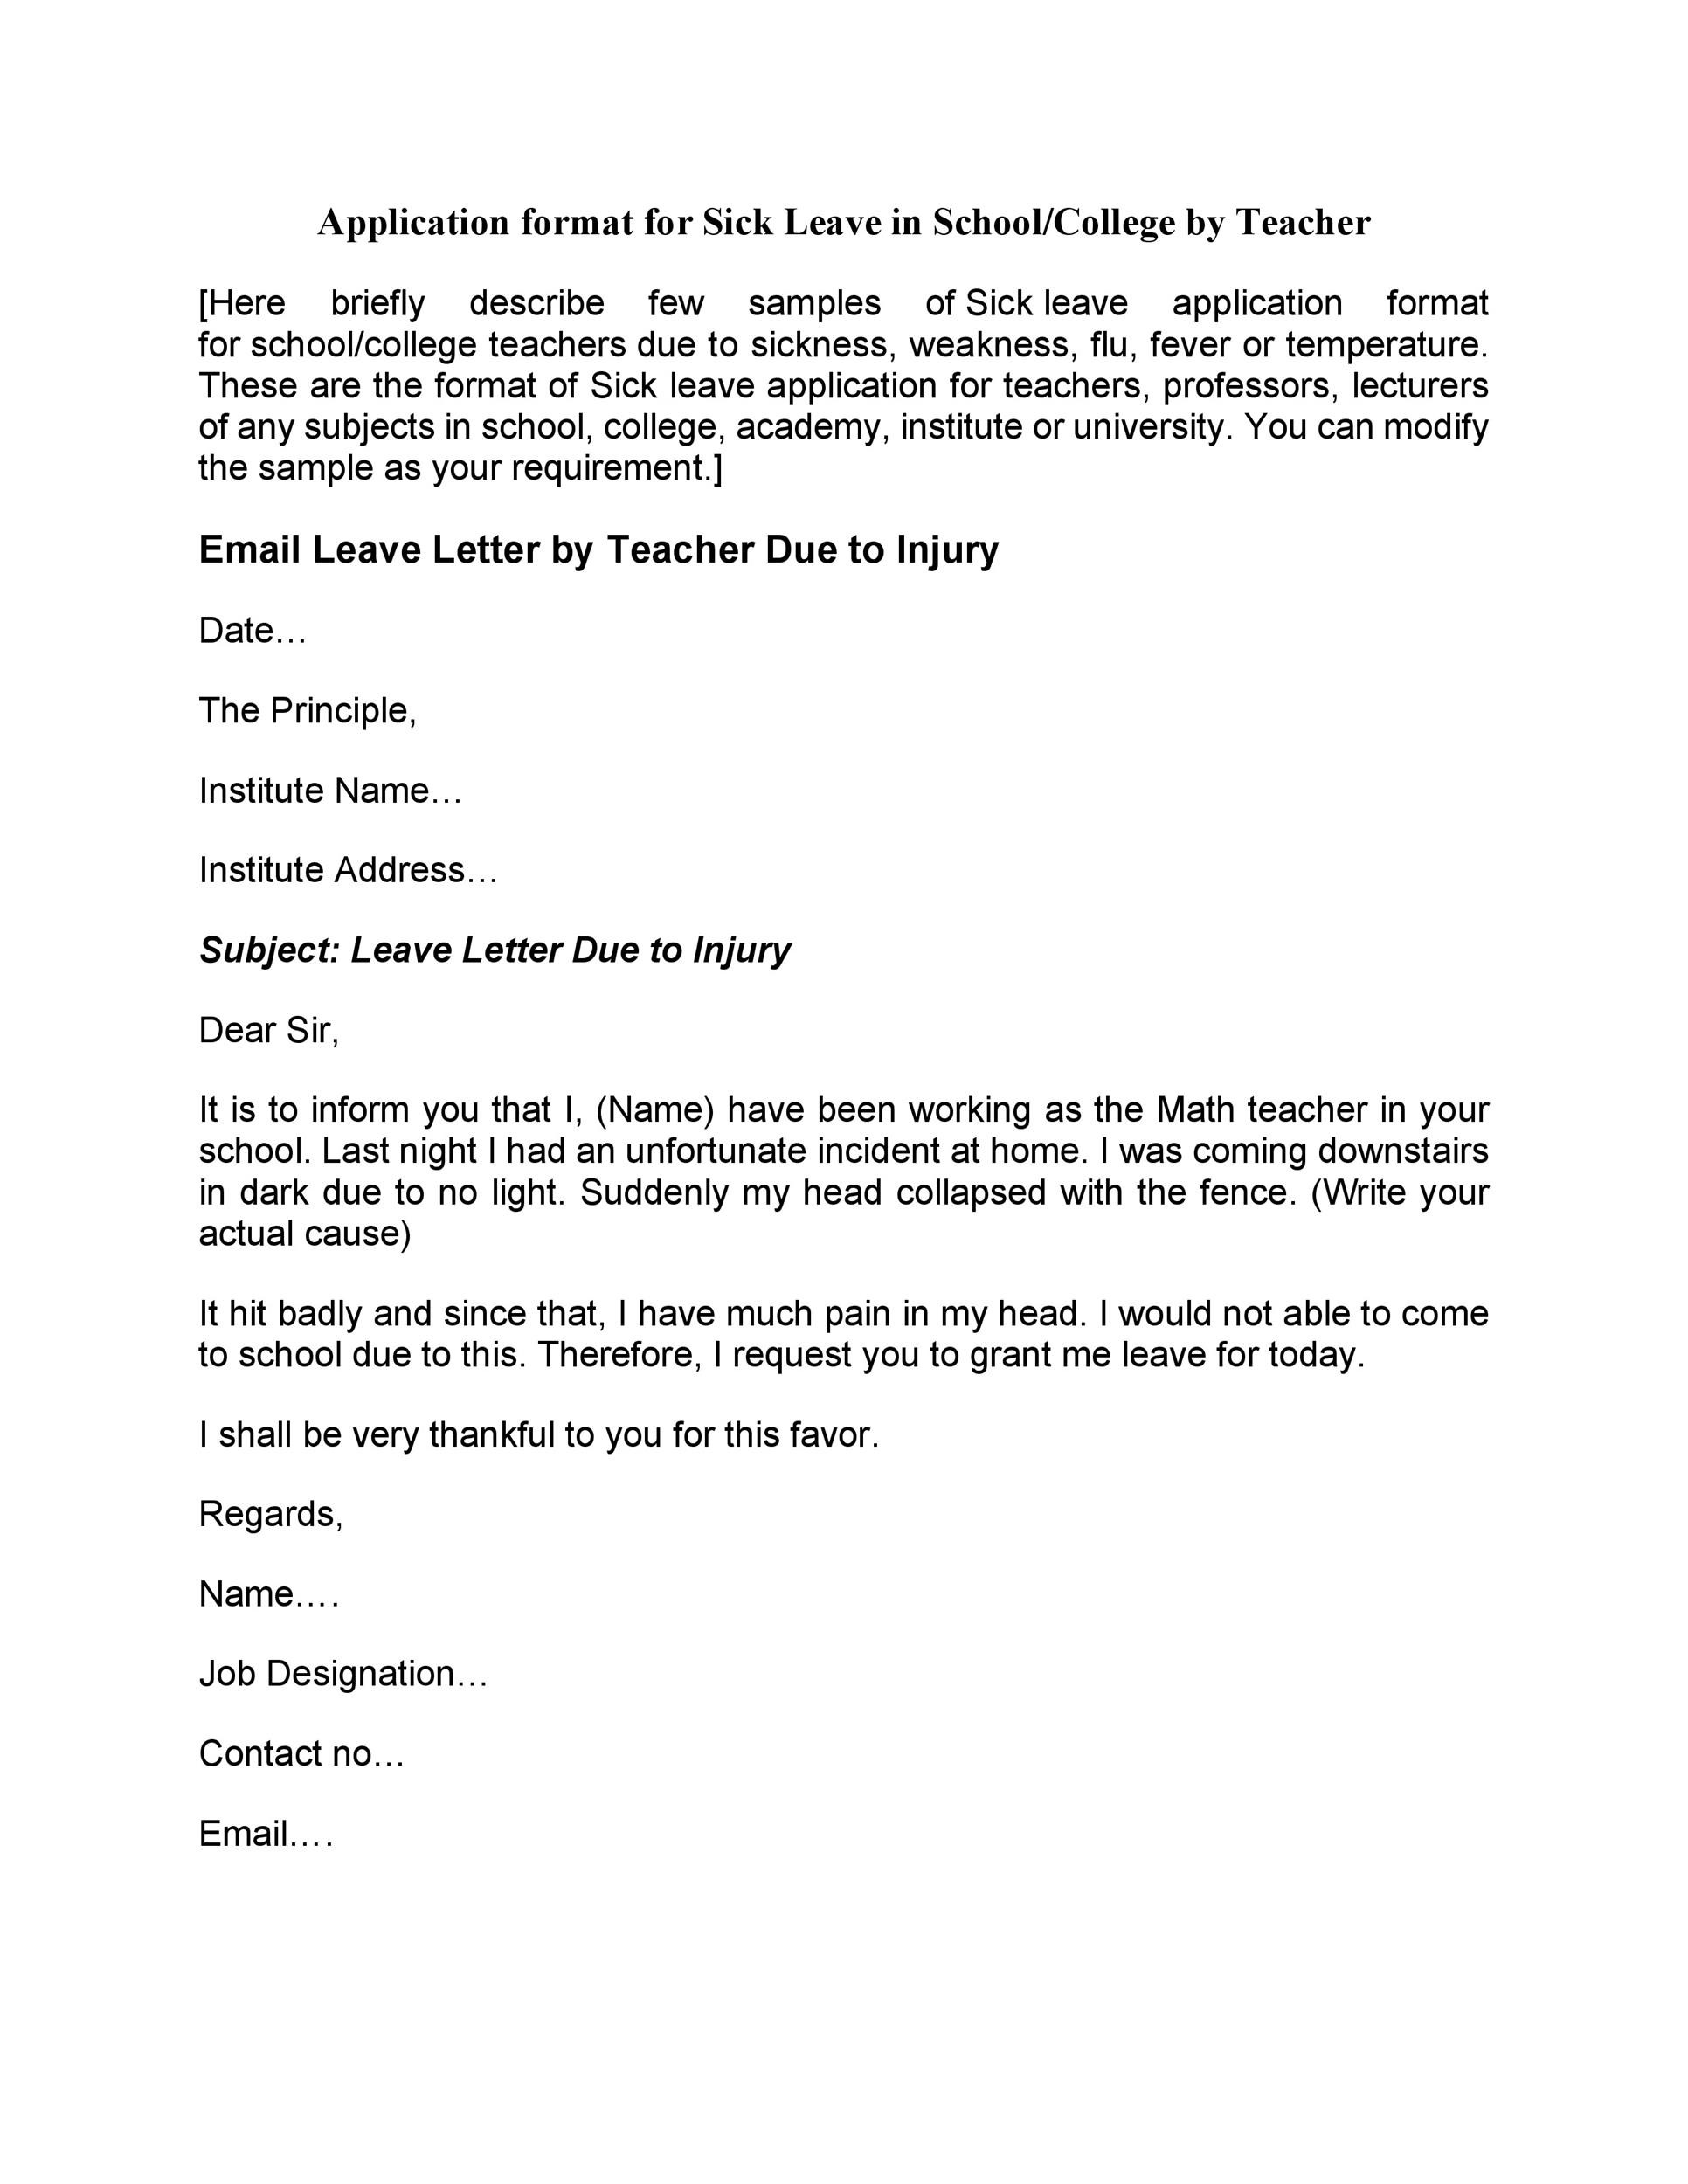 27 Professional Sick Leave Email Templates ᐅ TemplateLab